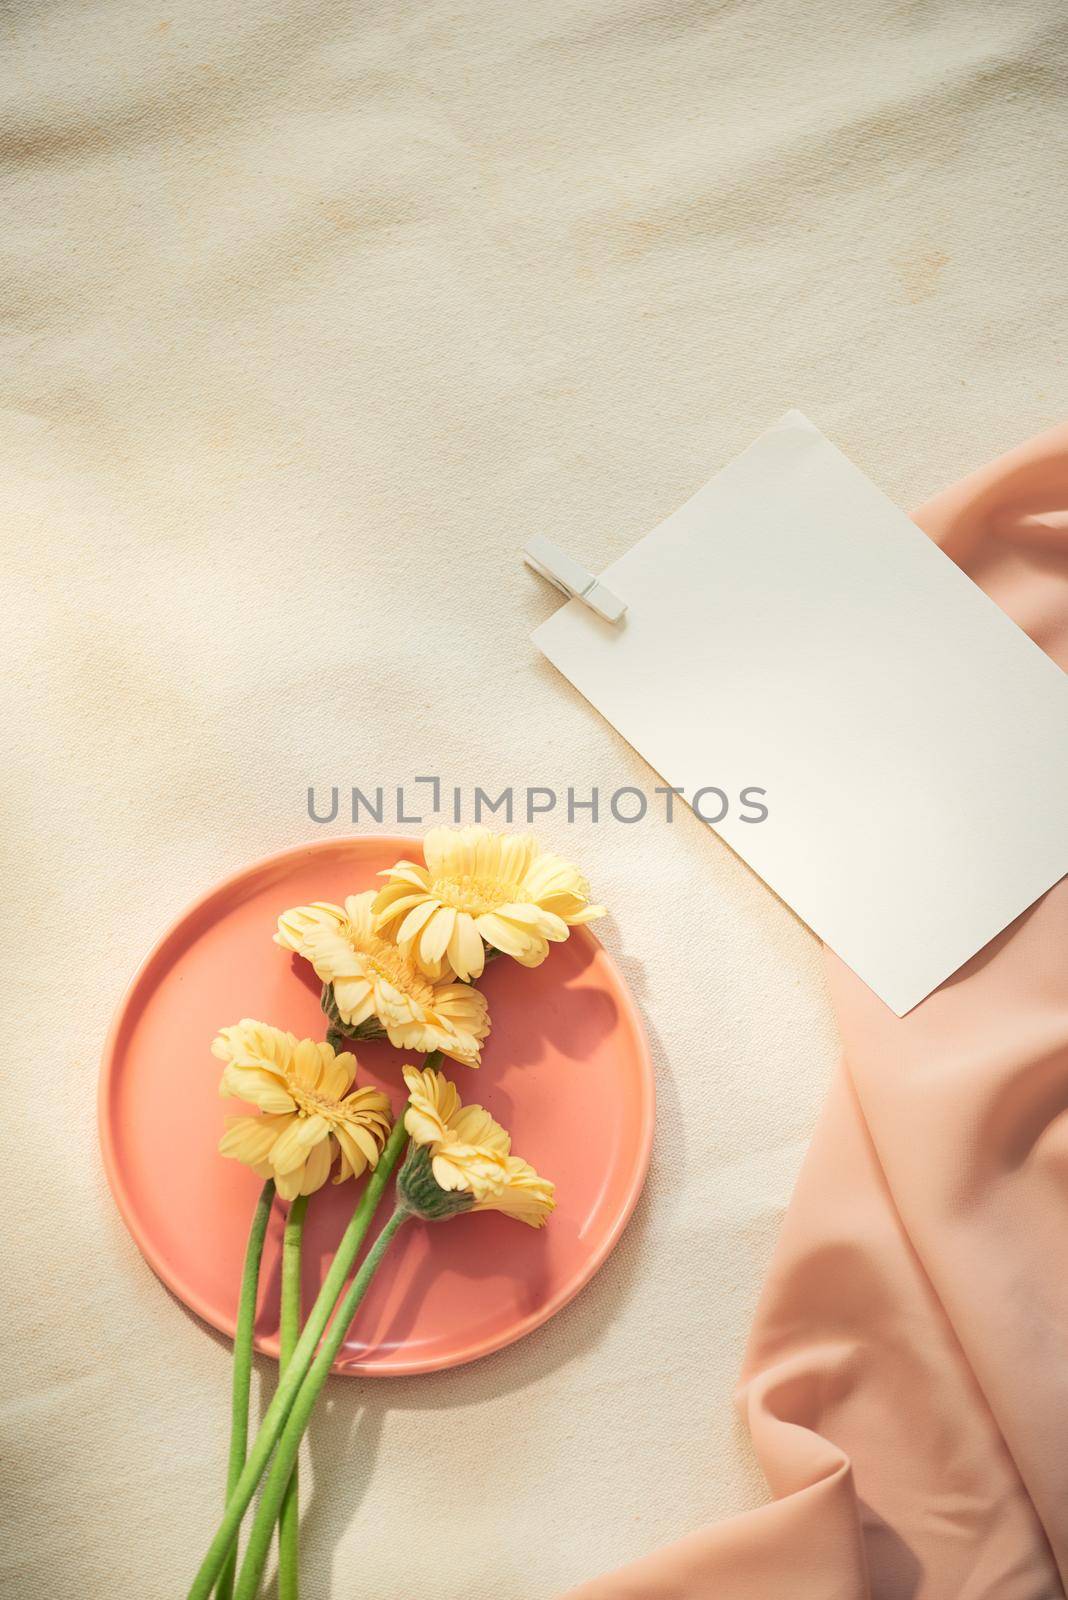 Flowers on the plate with fabric and paper on yellow background  by makidotvn